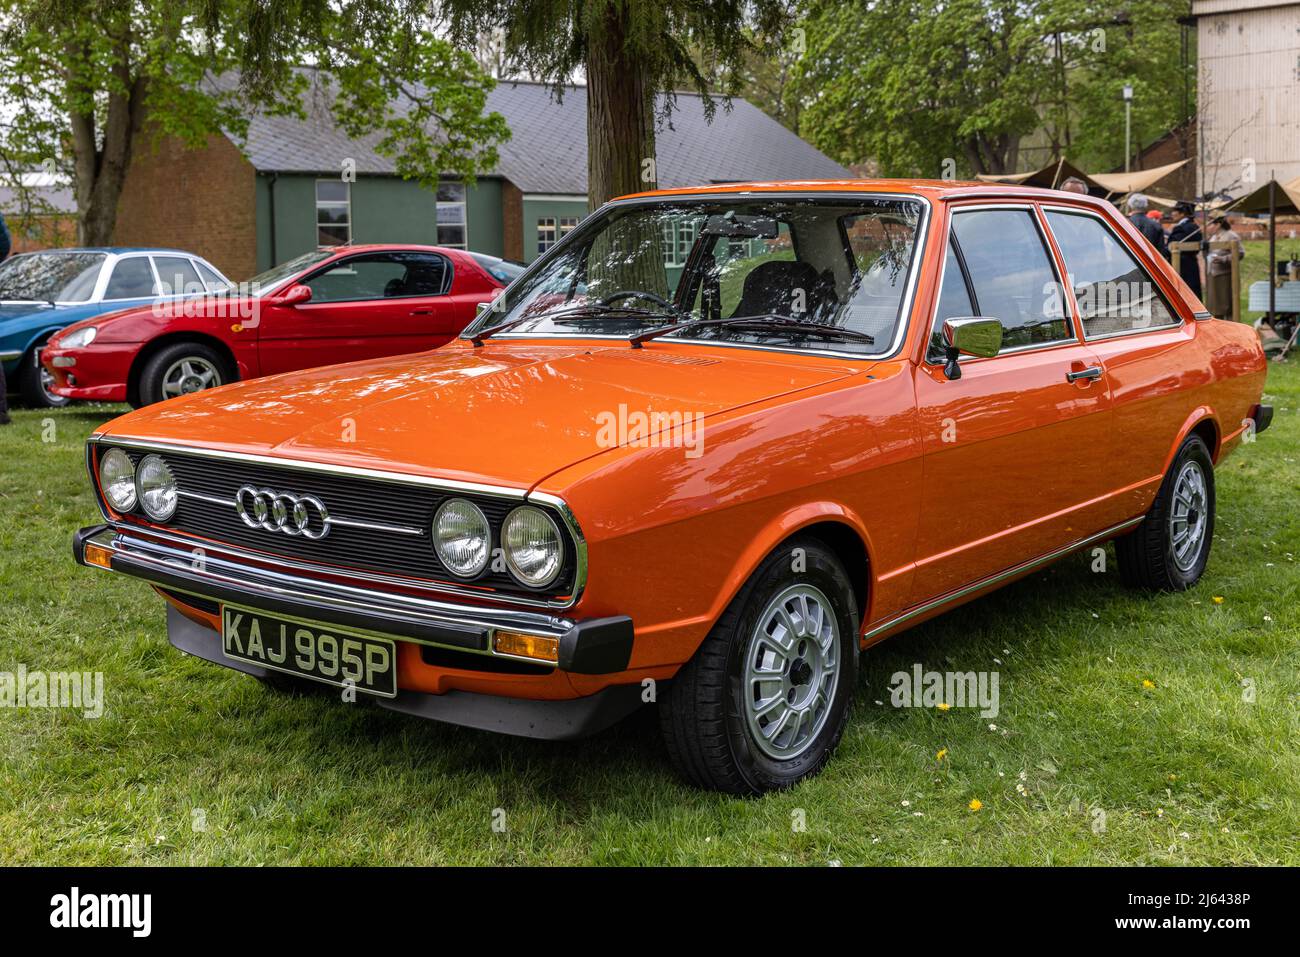 1975 Audi 80 GT (KAJ 995P) on display at the April Scramble held at the  Bicester Heritage Centre on the 23rd April 2022 Stock Photo - Alamy